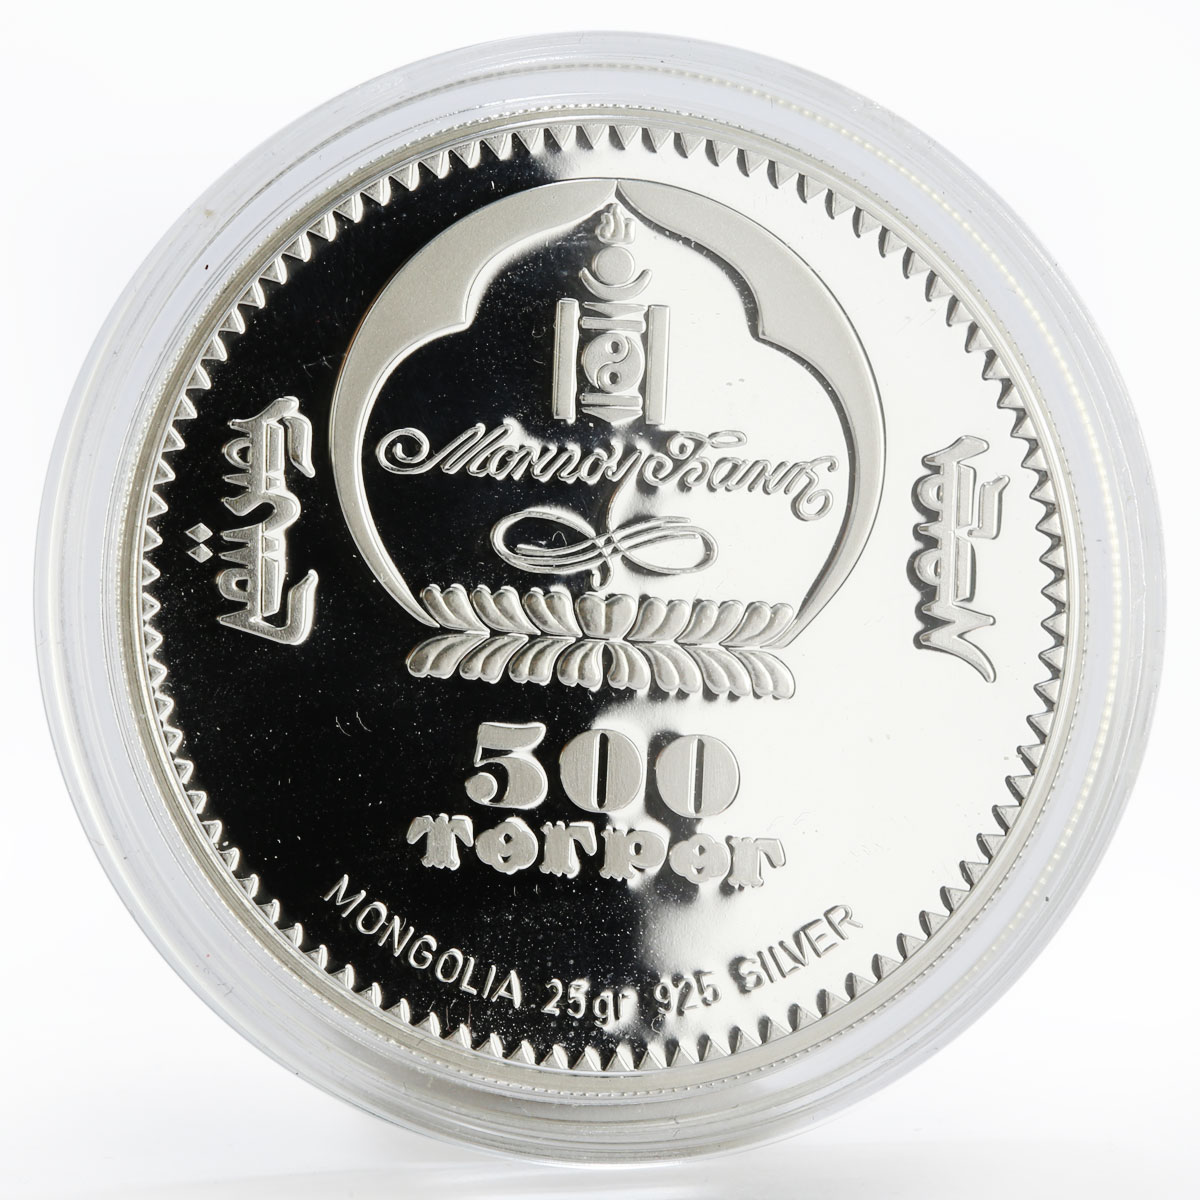 Mongolia 500 togrog 7 Wonders Christ Redeemer colored proof silver coin 2008